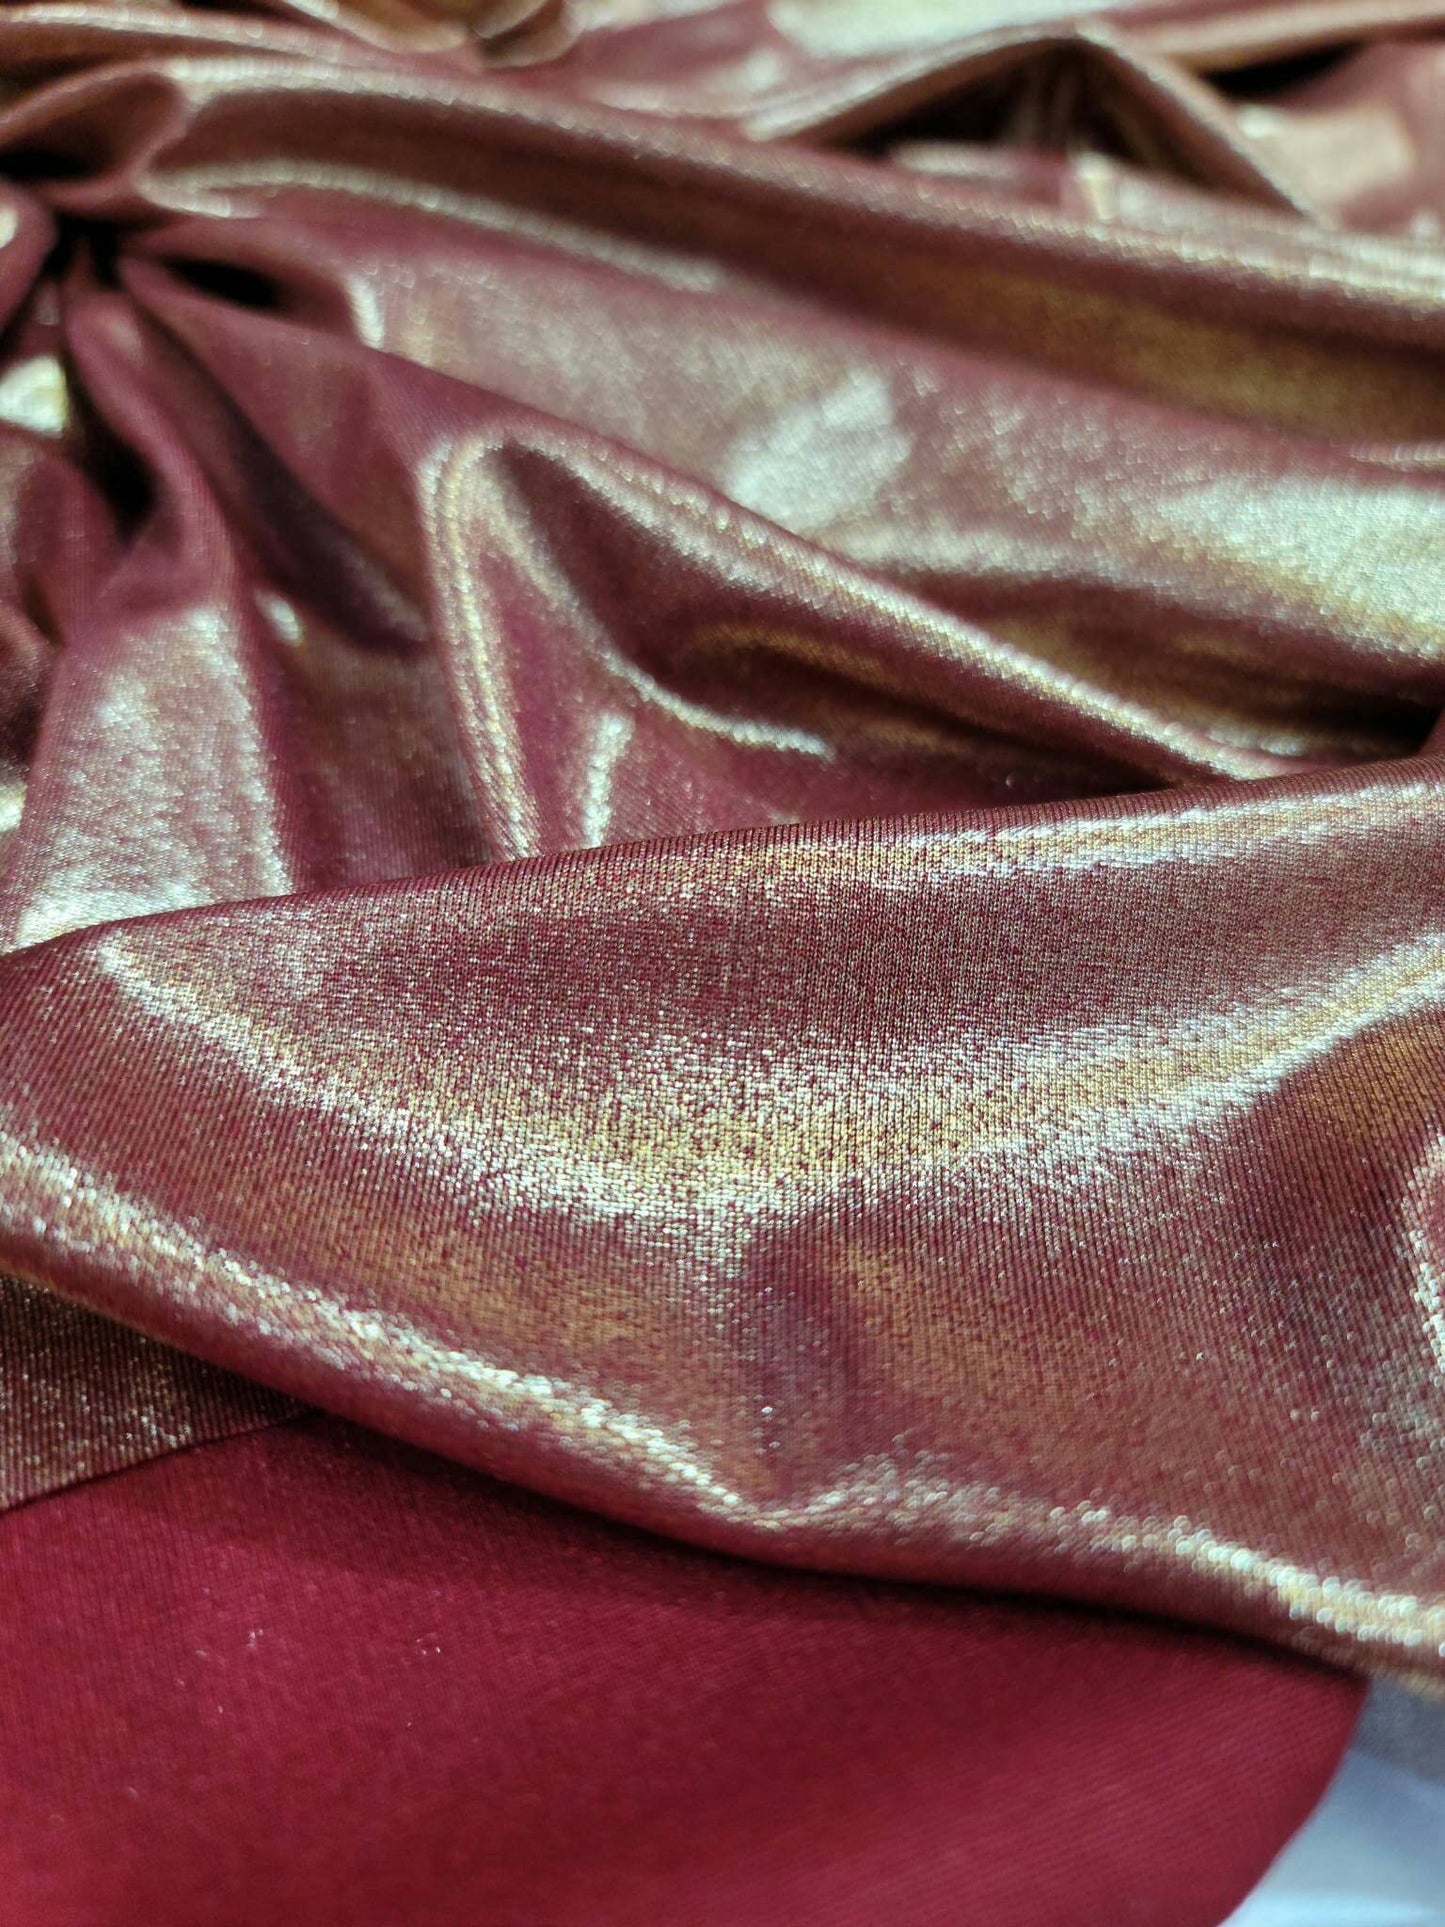 Burgundy Spandex Gold Sparkly Shimmer Stretch Fabric By The Yard Metallic Gown Decoration Draping Clothing Background